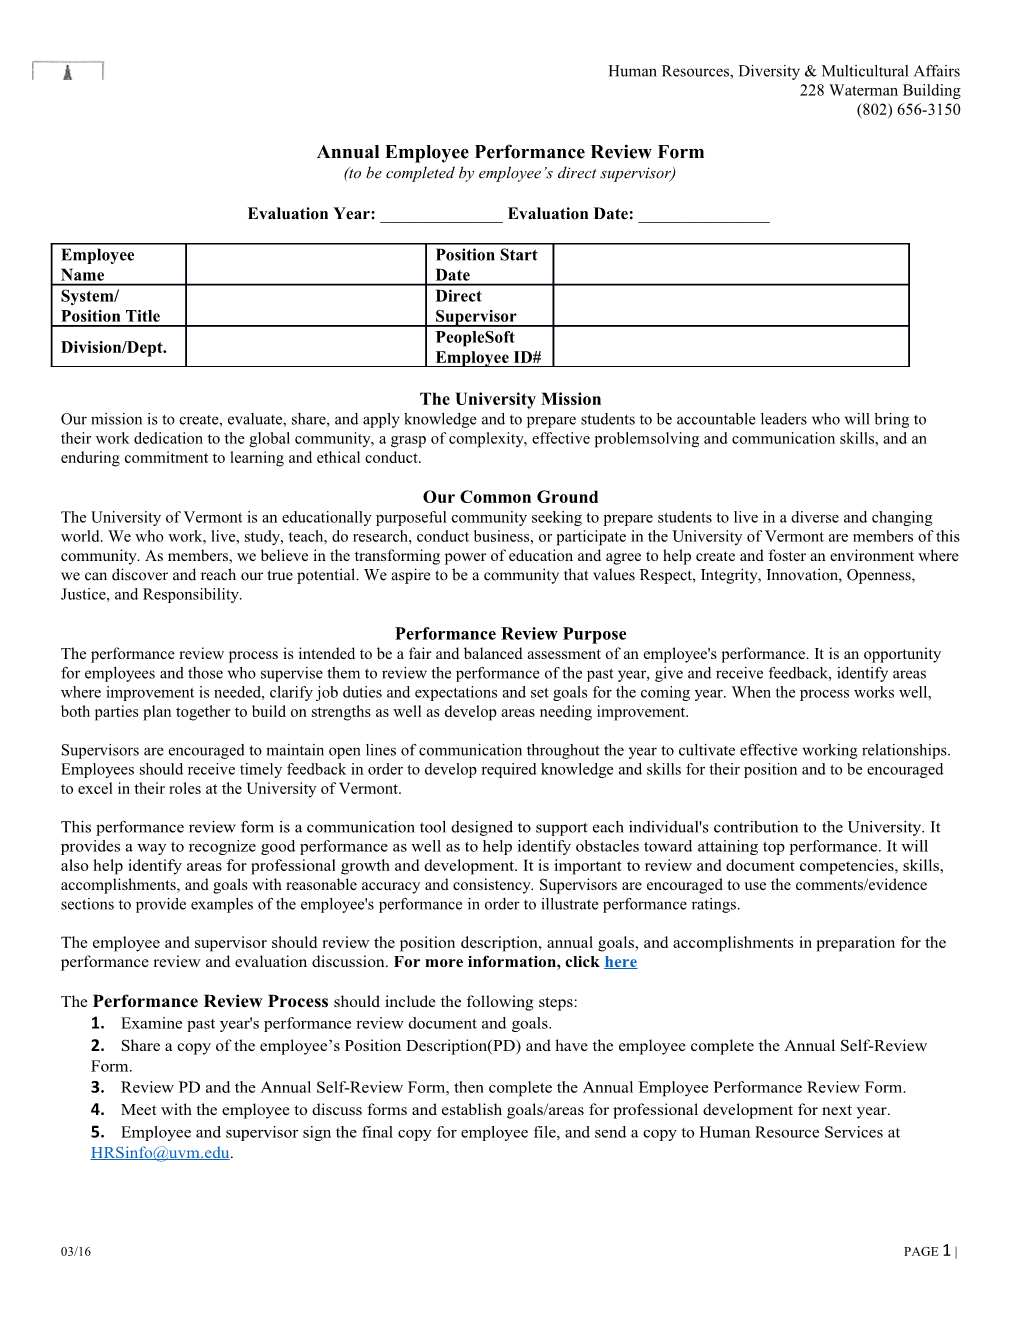 Annual Employee Performance Review Form